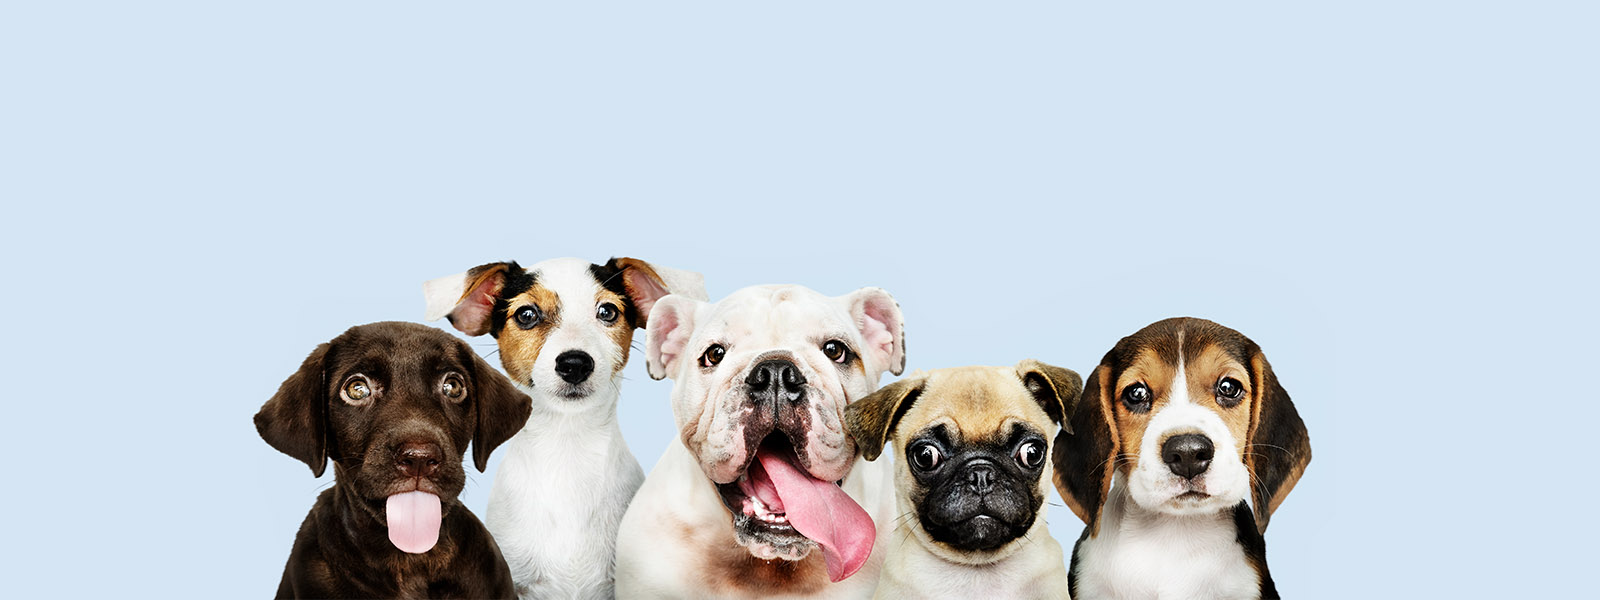 A Guide to Digital Marketing for Pet Stores